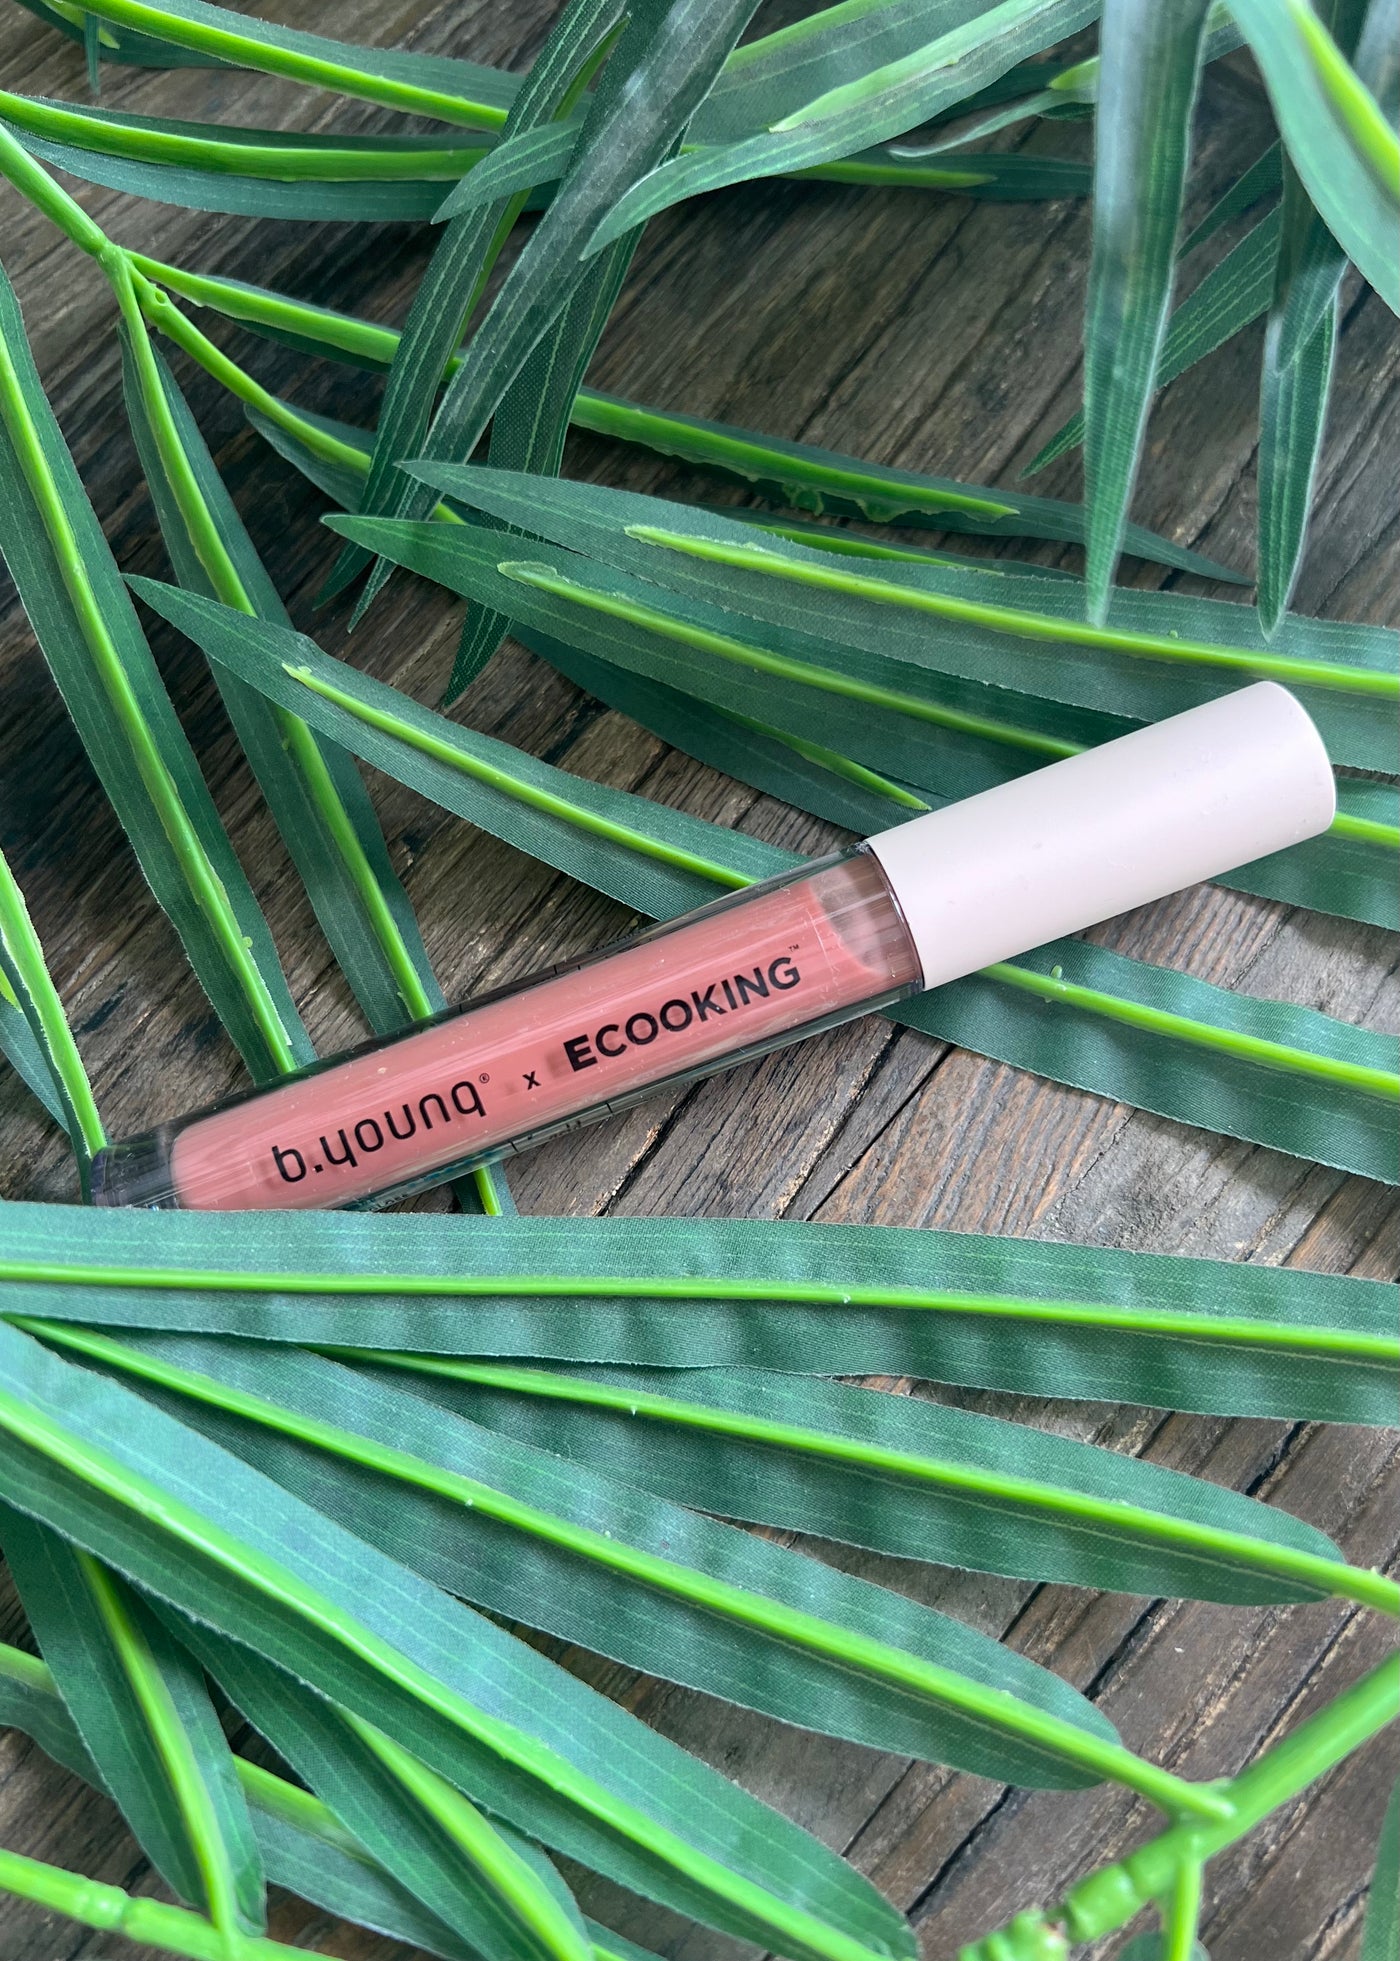 Byoung Nude Lipgloss